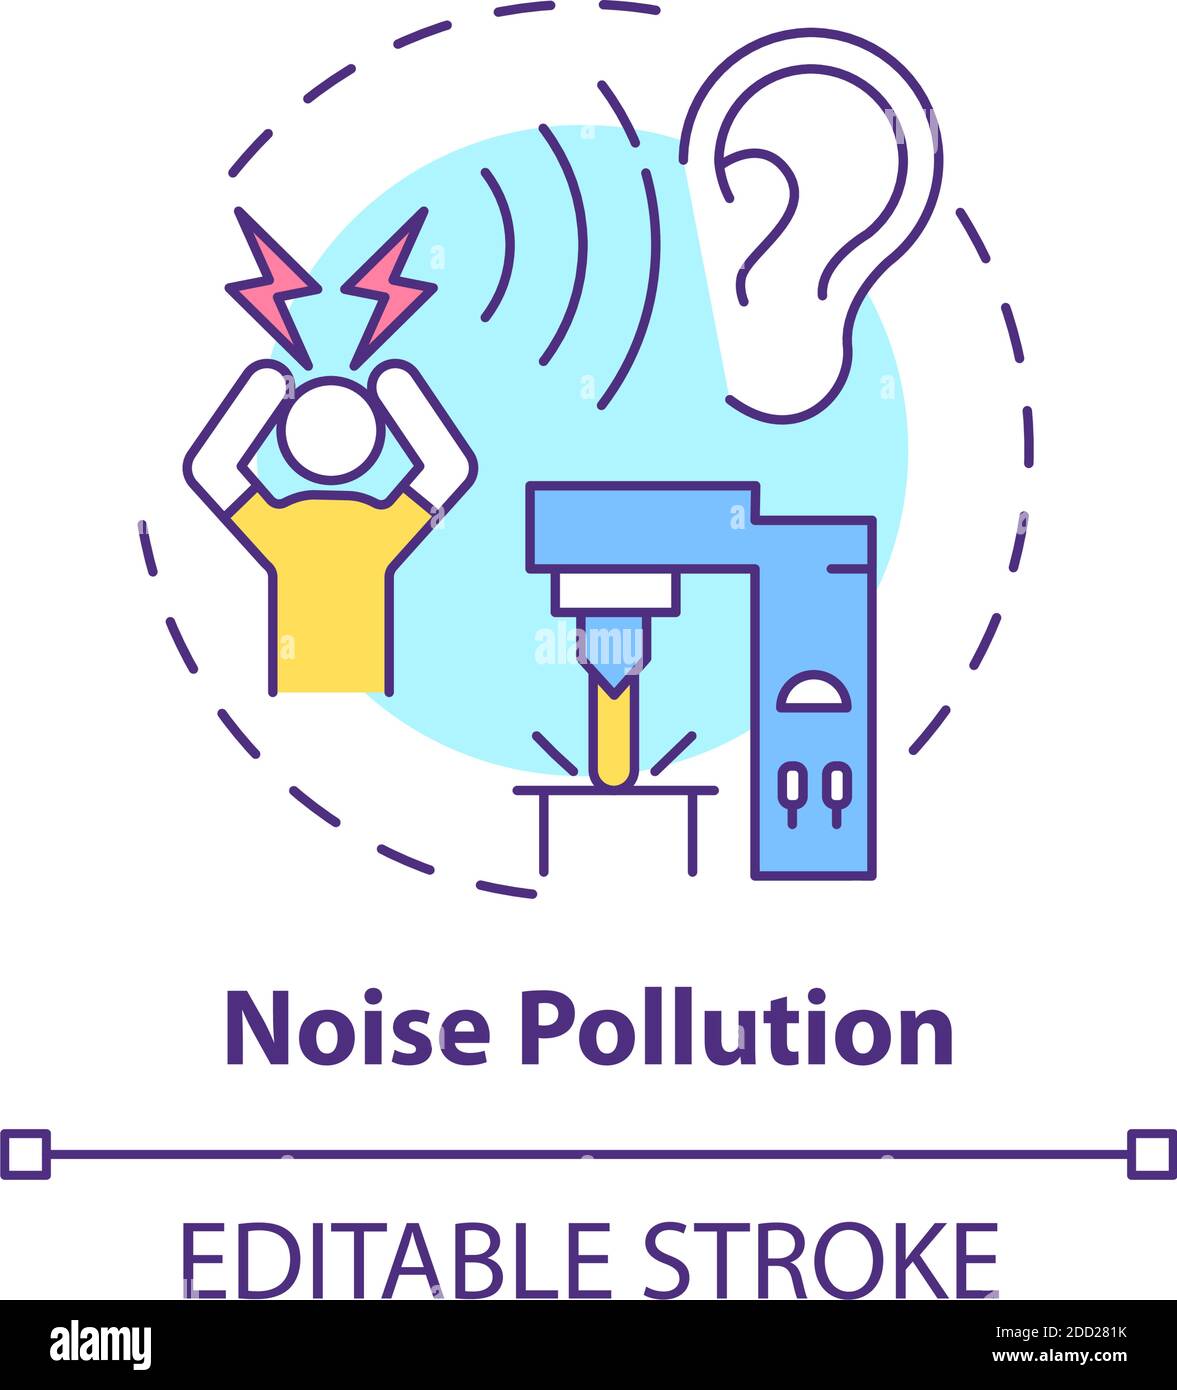 Tackling Noise Pollution With Slow Sound · Frontiers for Young Minds-saigonsouth.com.vn